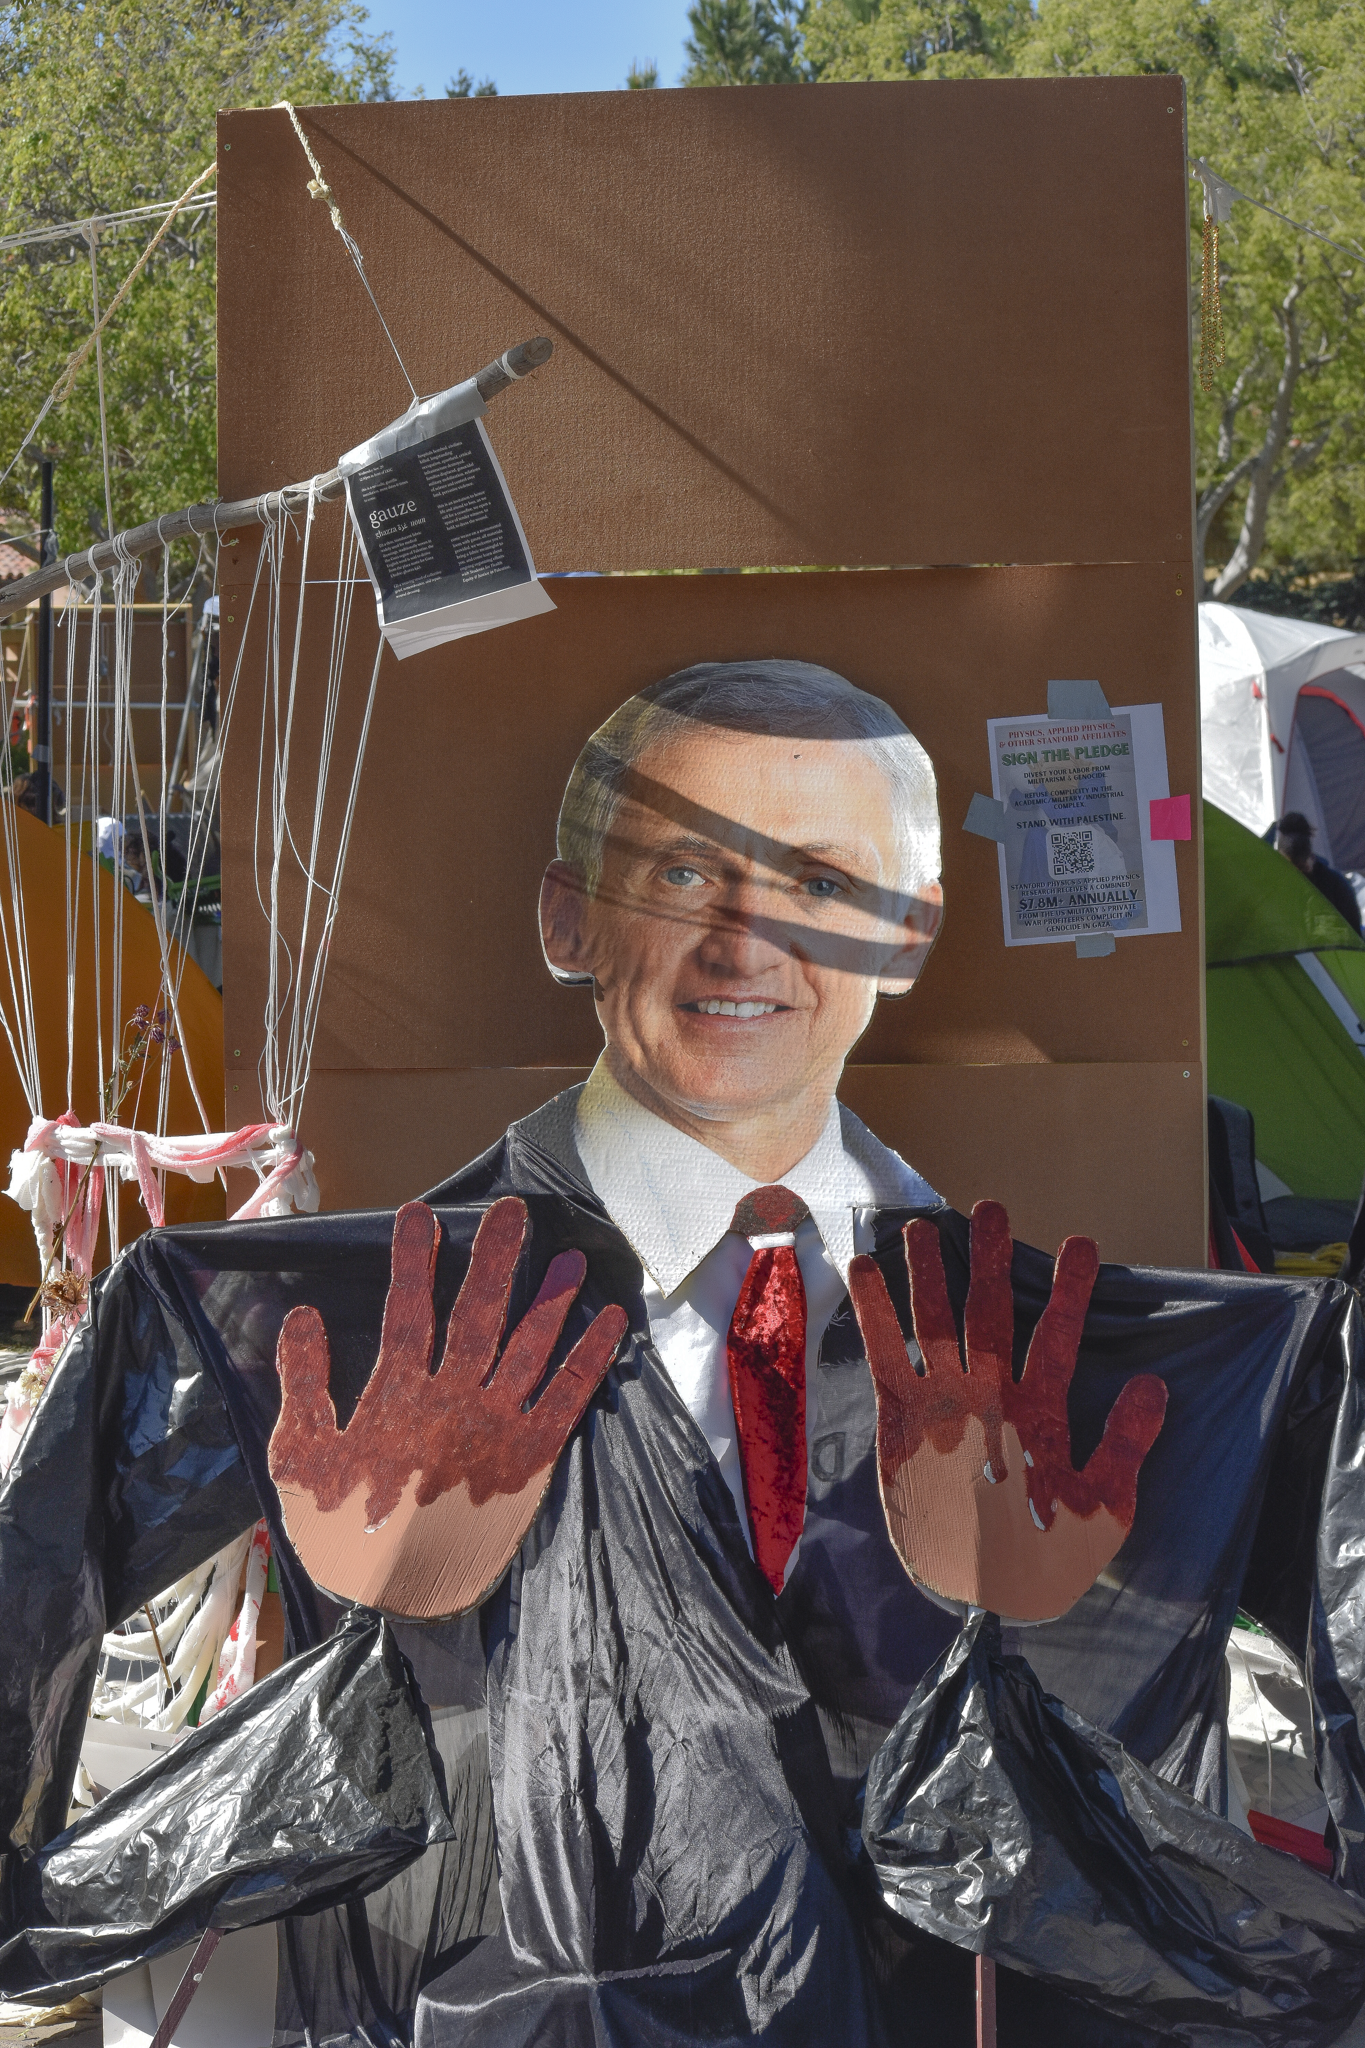 Cutout of Stanford President Richard Saller with “blood on his hands.” A visual statement made by the inhabitants of the encampments criticizes what they perceive as his role in the ongoing conflict in Gaza. It features a cutout of Richard Saller, Stanford’s president, along with a cardboard cut of hands stained with blood.